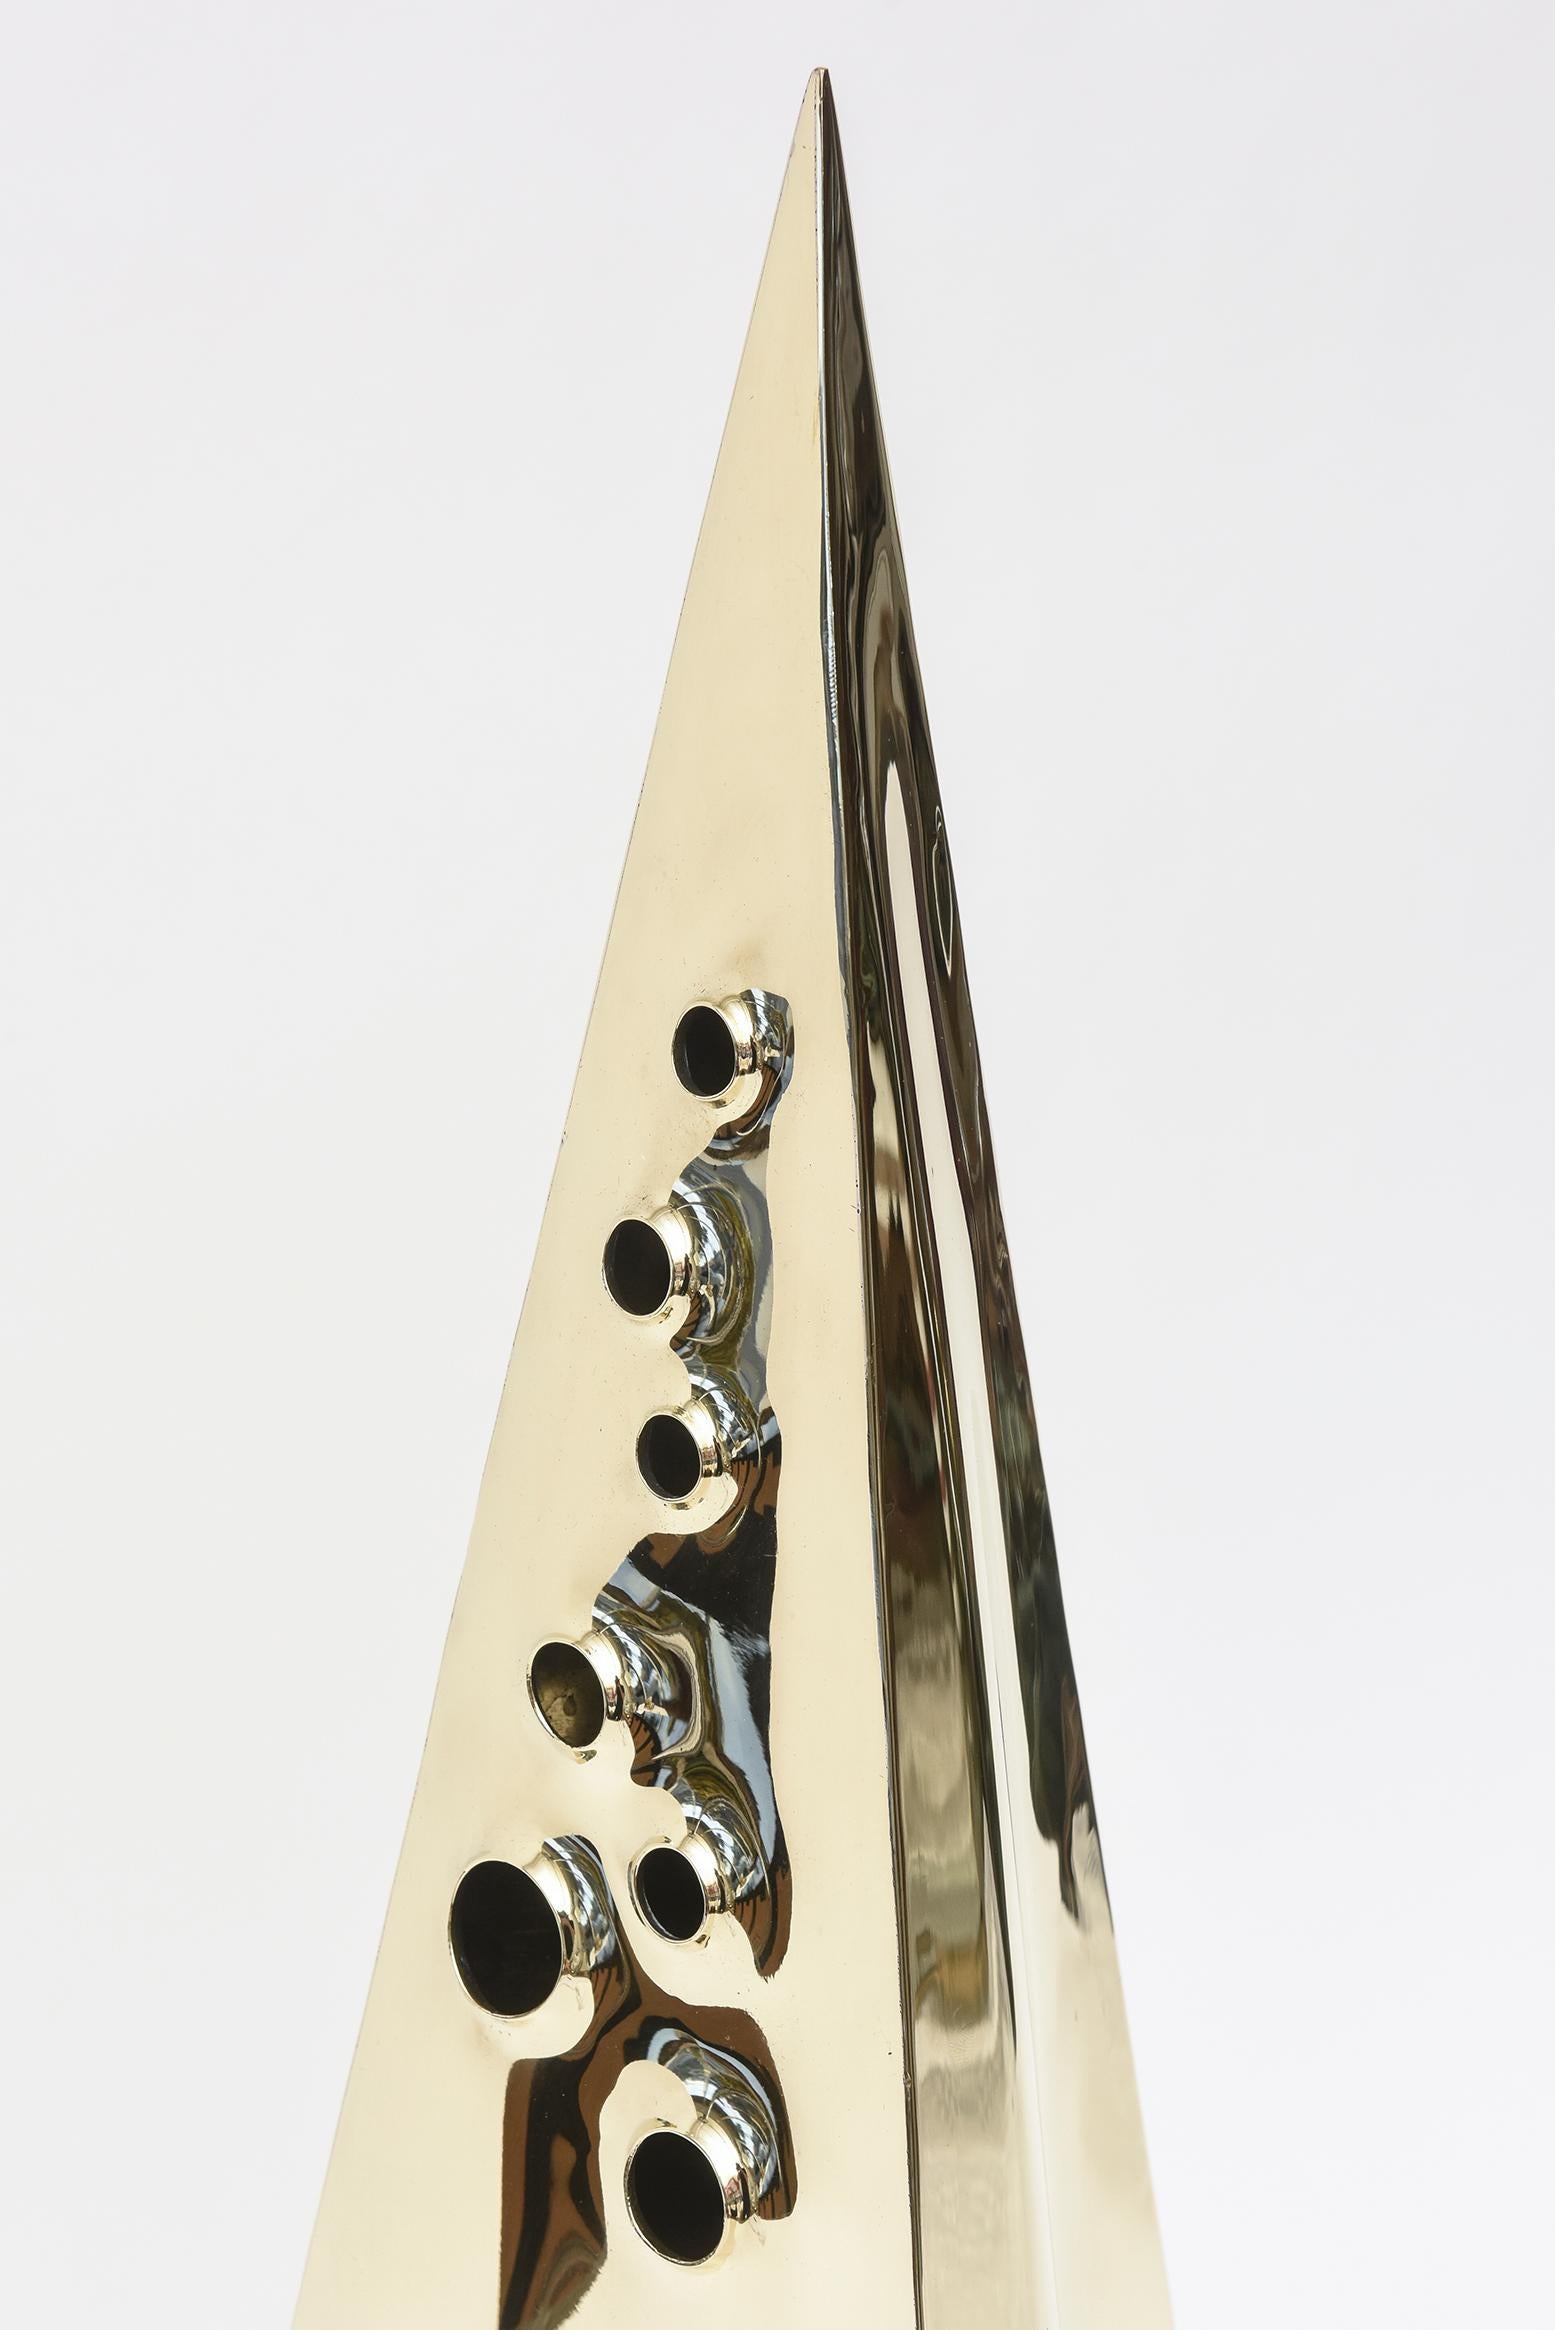 American Vintage Brass Pyramid Triangle Tall Modernist Sculpture For Sale